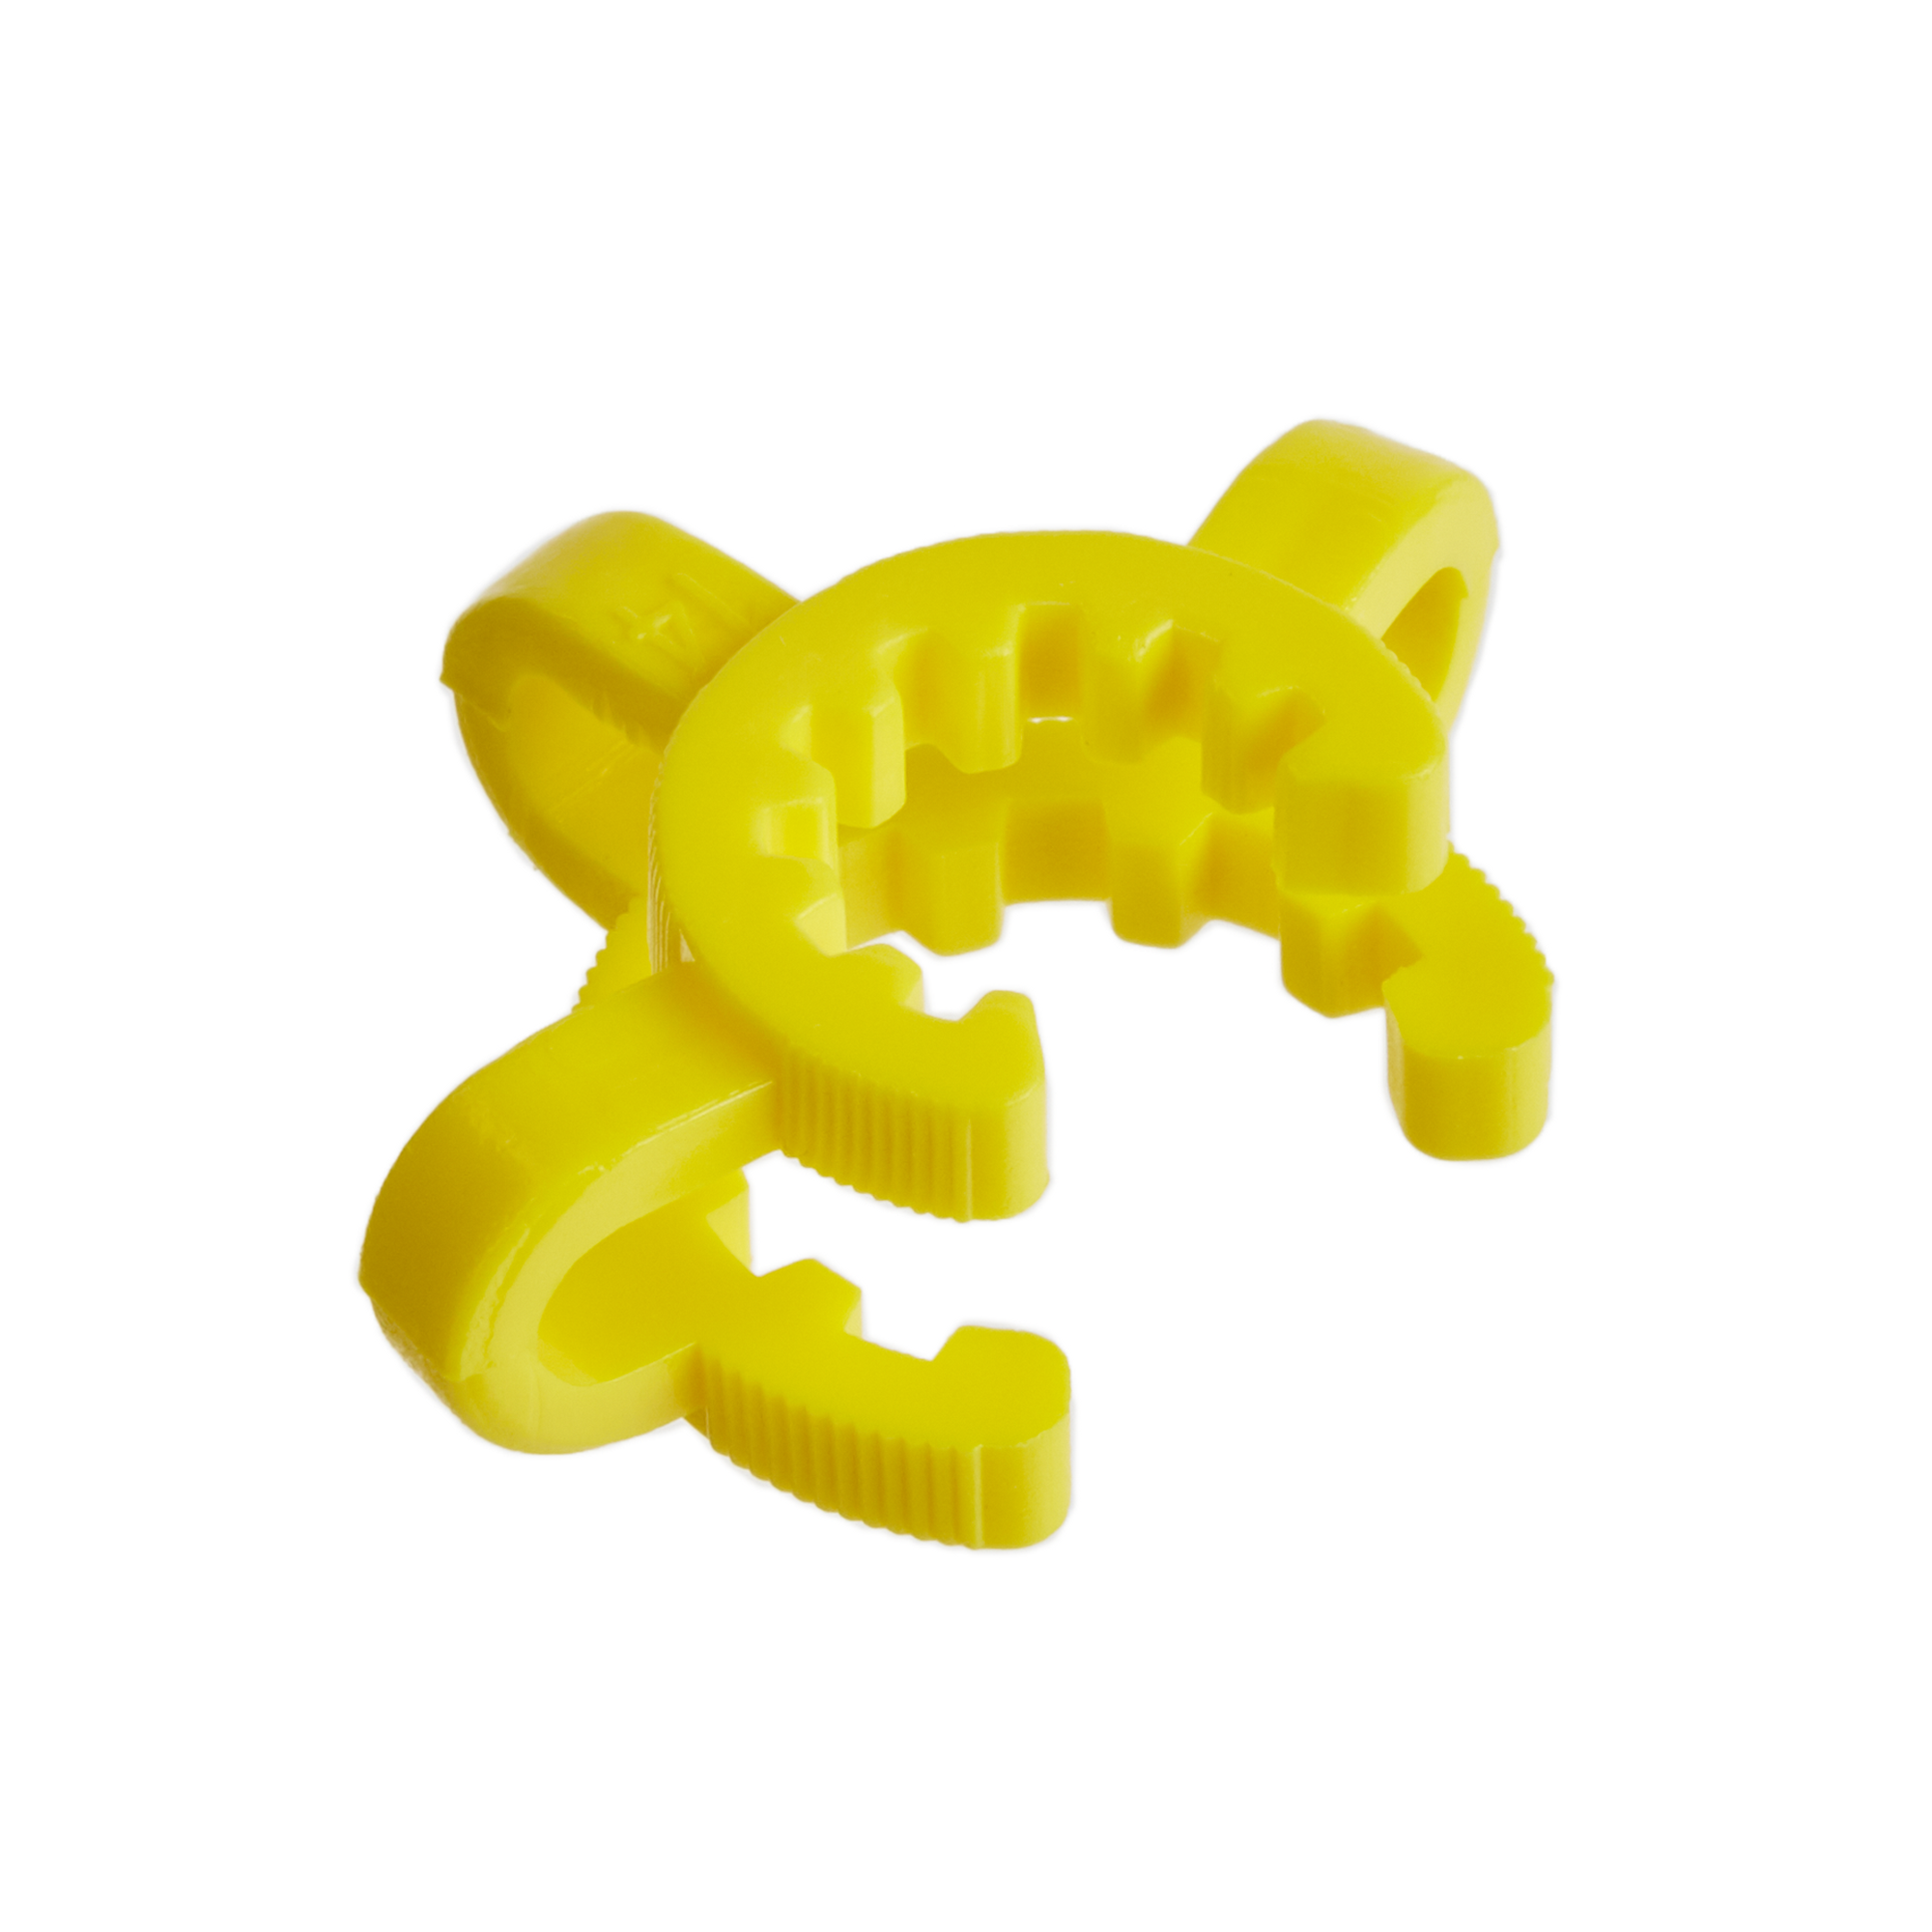 Plastic Joint Clips Yellowfor Cone 14 23